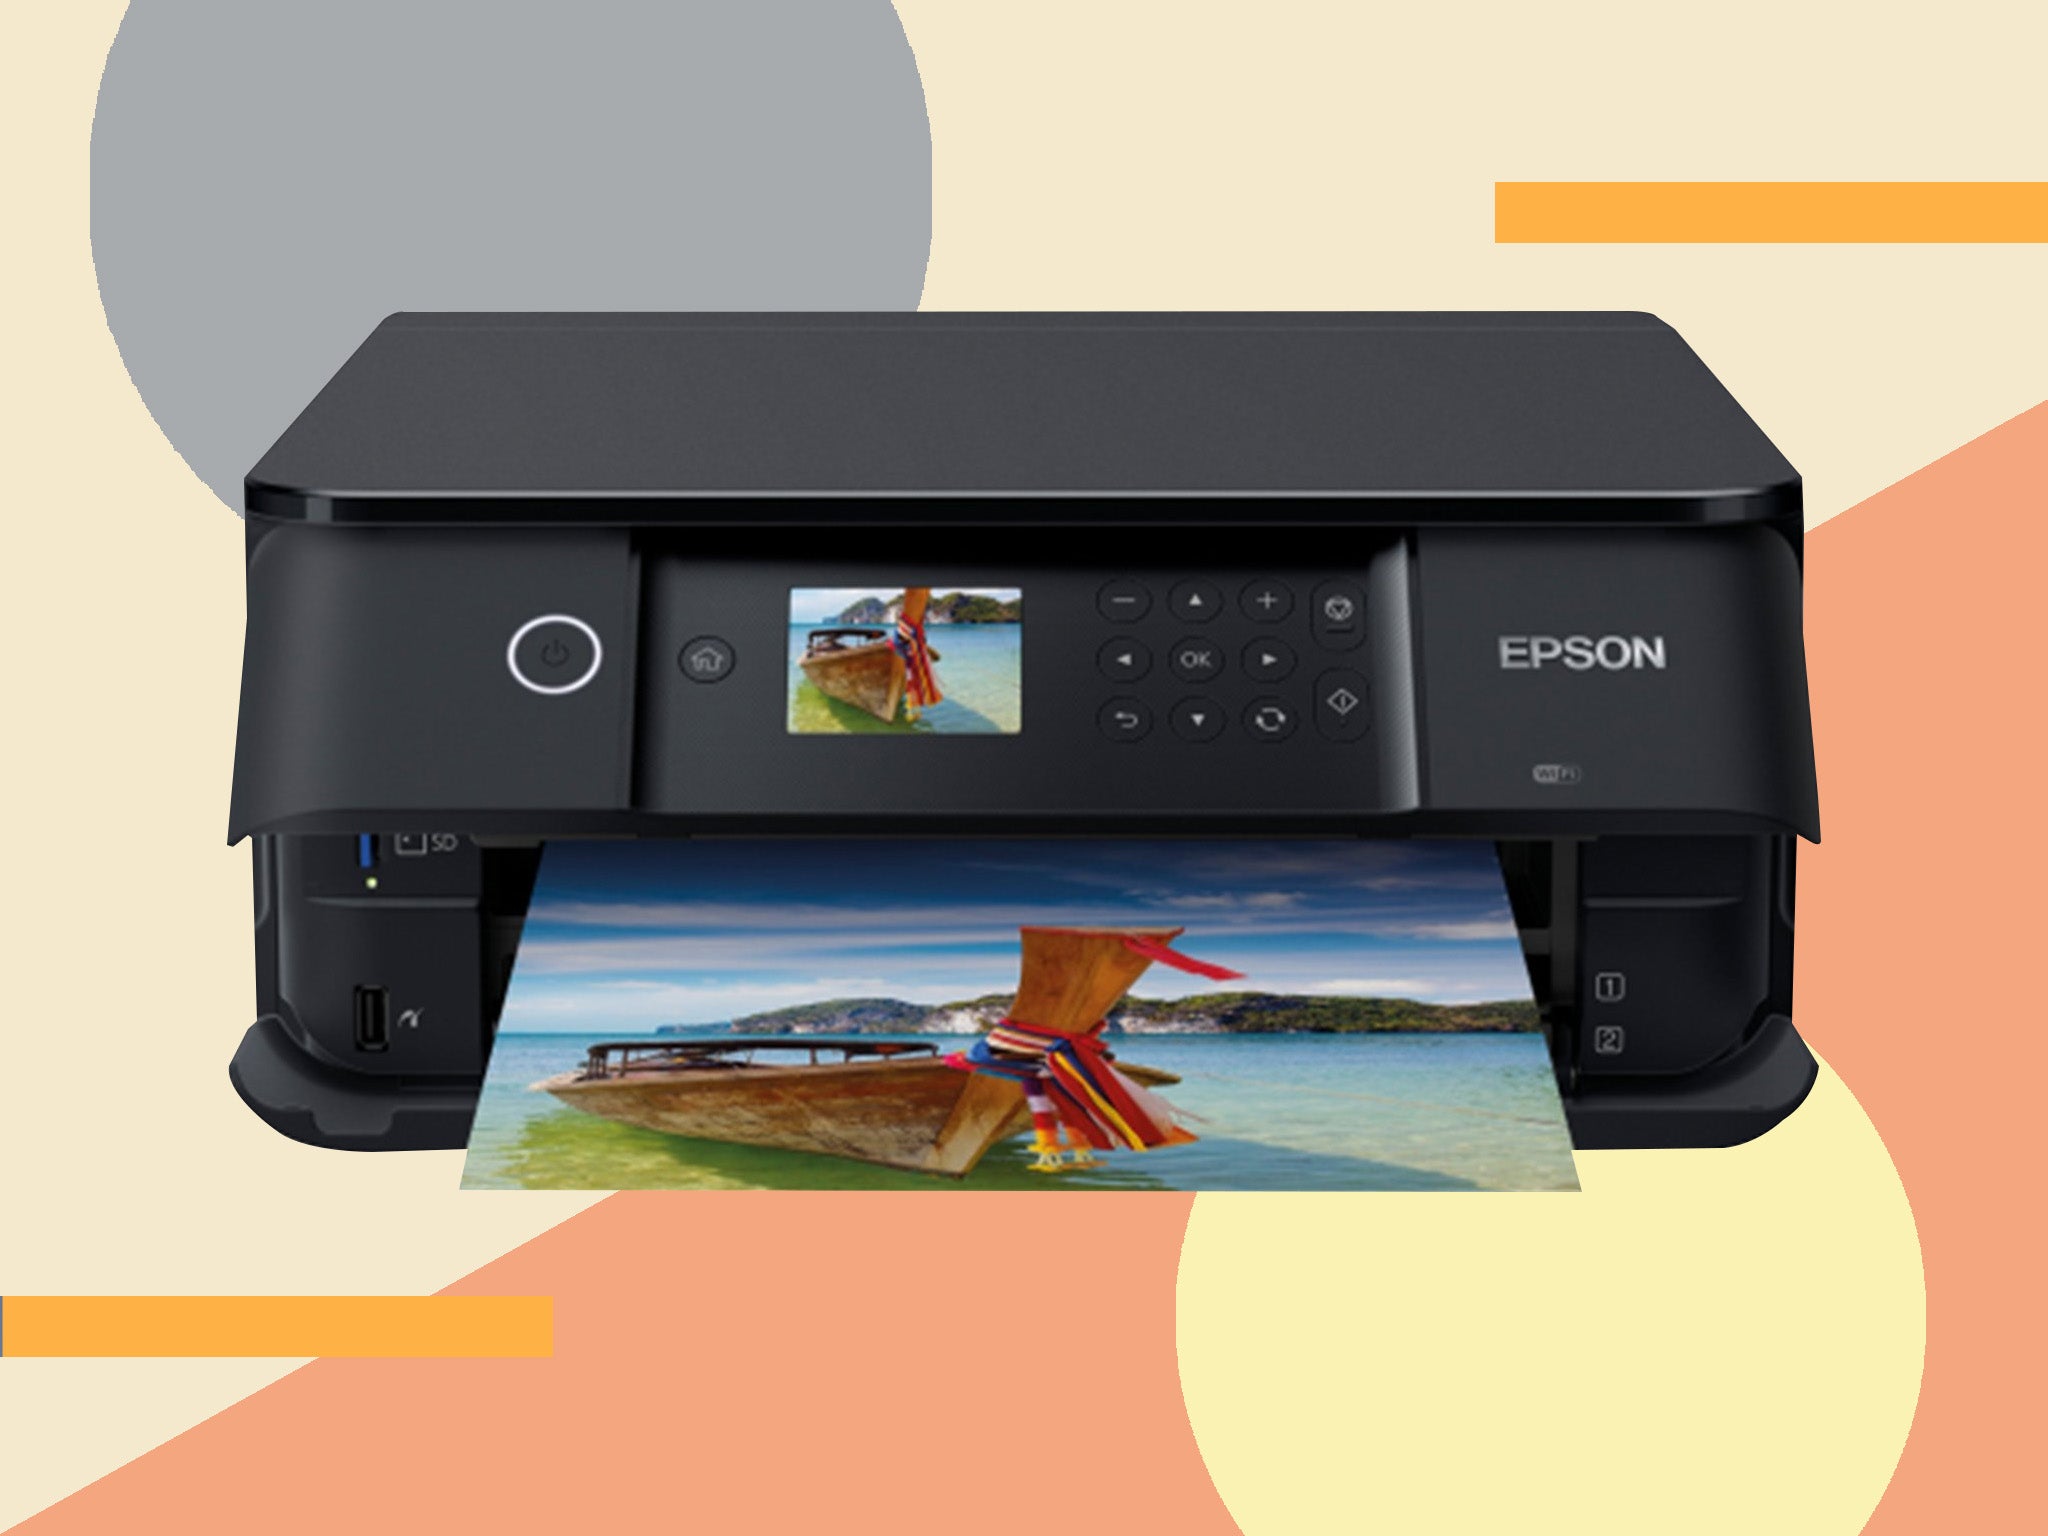 We tested the XP-6100 on print speed and quality, ease of setting up, tech specs, ink usage and general look and feel